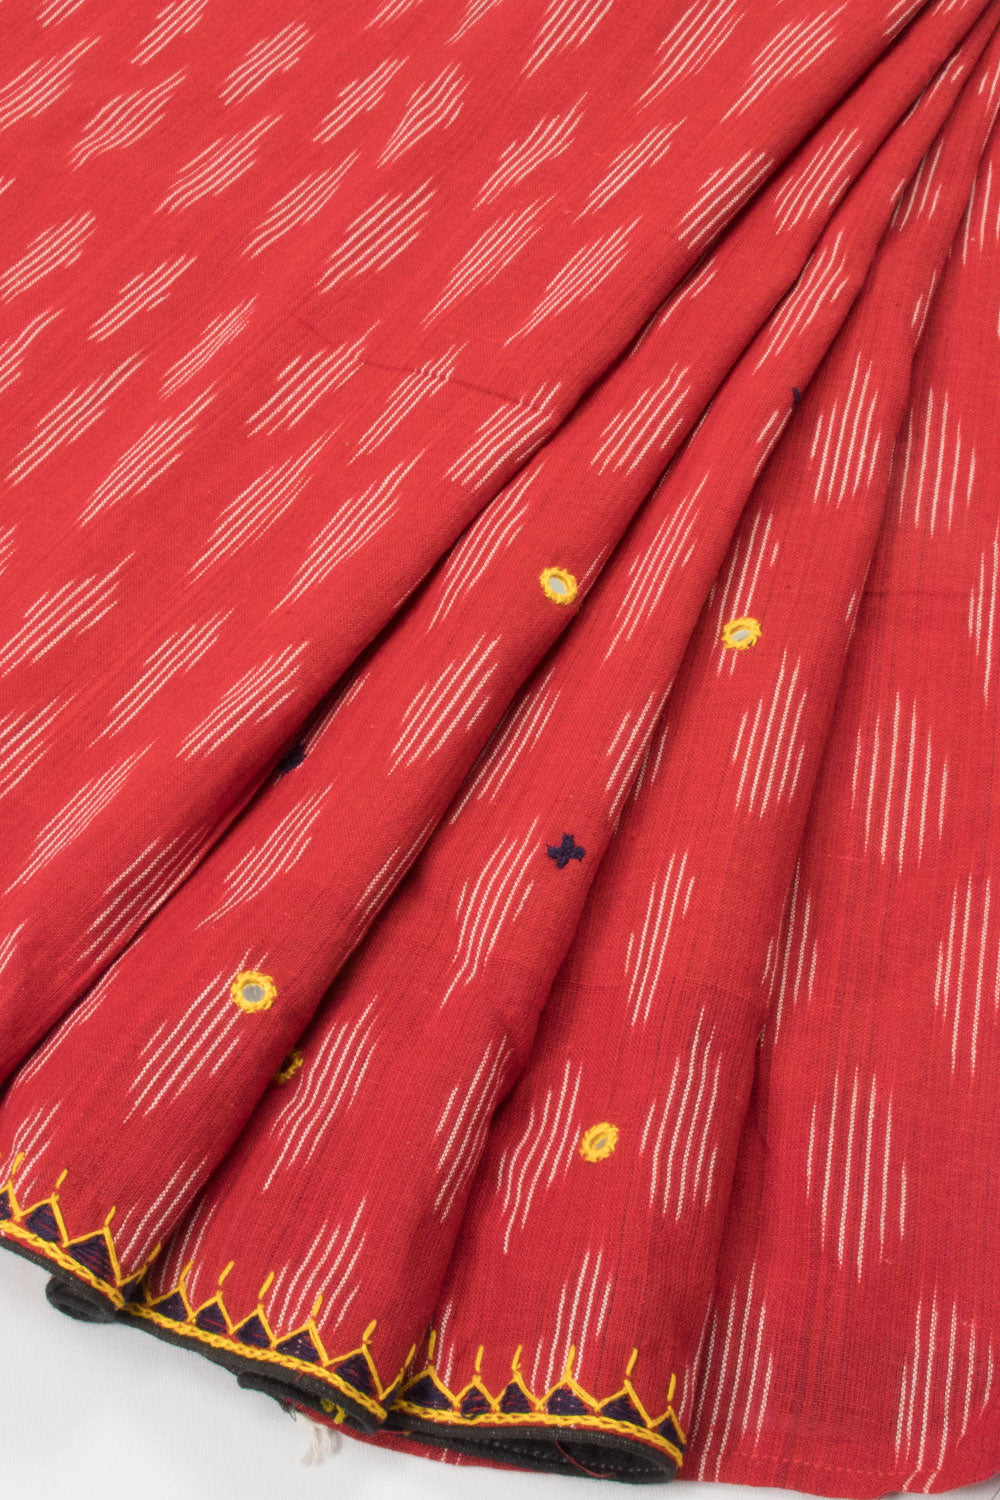 Red Ikat Embroidered Cotton Blouse Material - Avishya